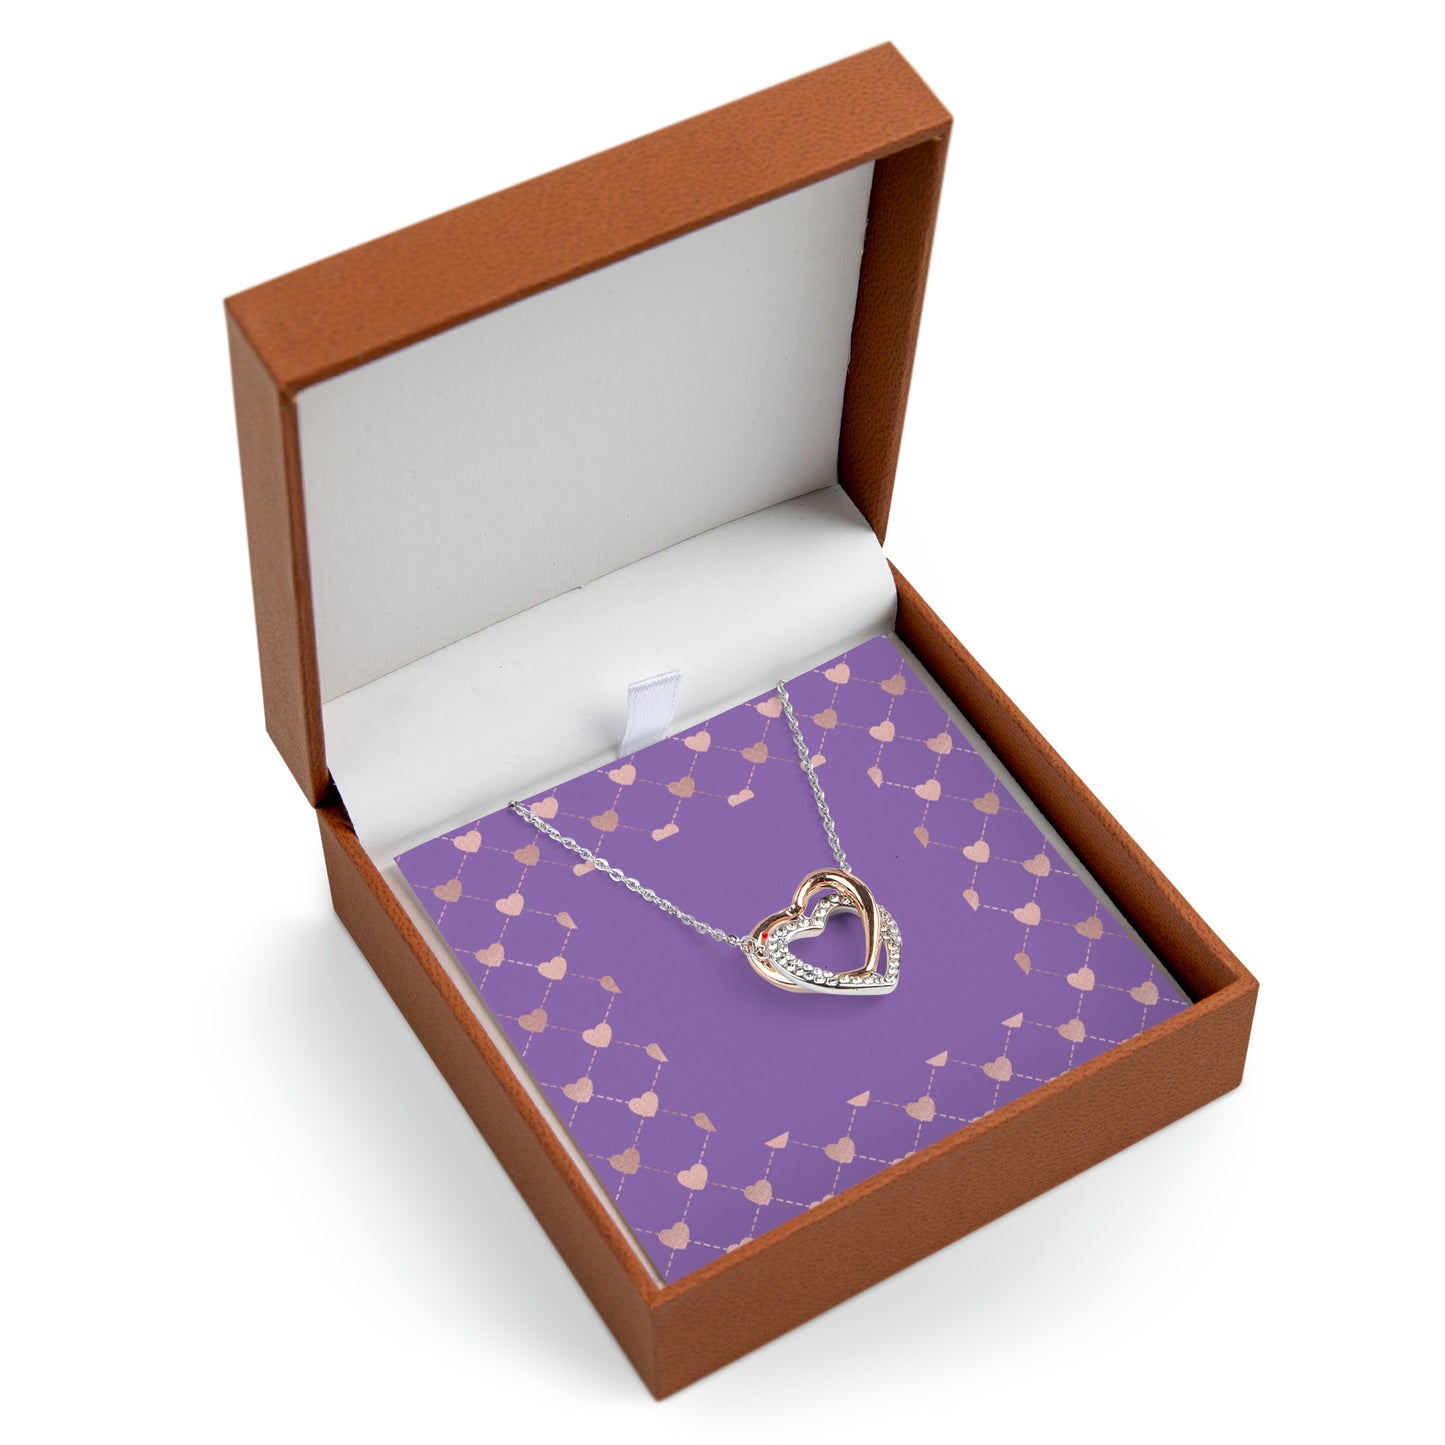 Sweethearts Necklace and Luxury Box